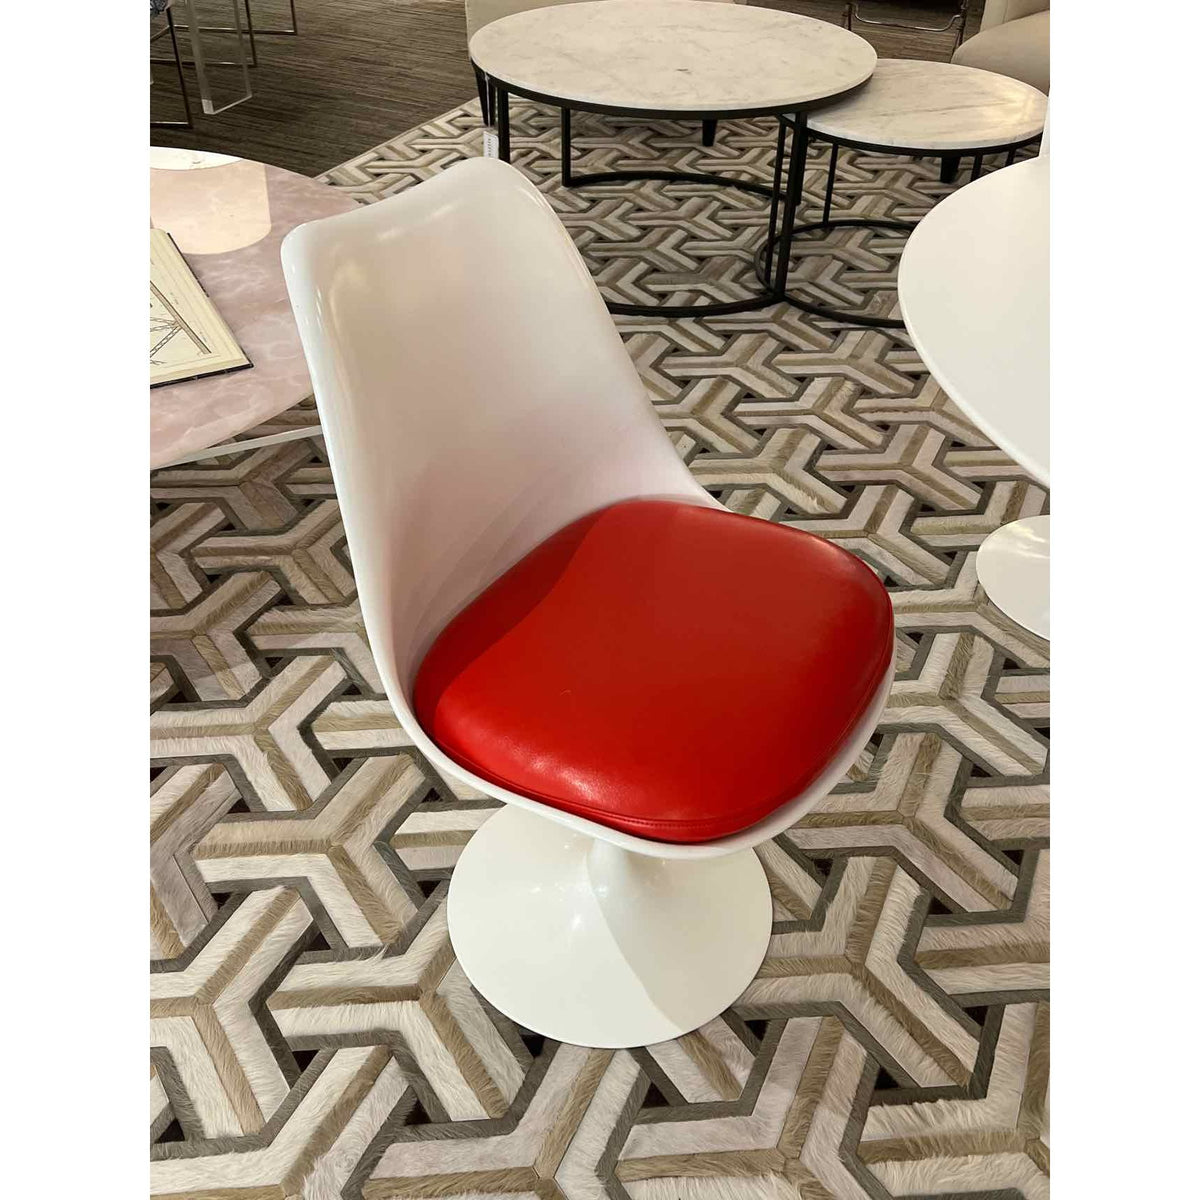 Knoll 47" Saarinen Tulip Table and 4 Matching Chairs w/ Red Cushions